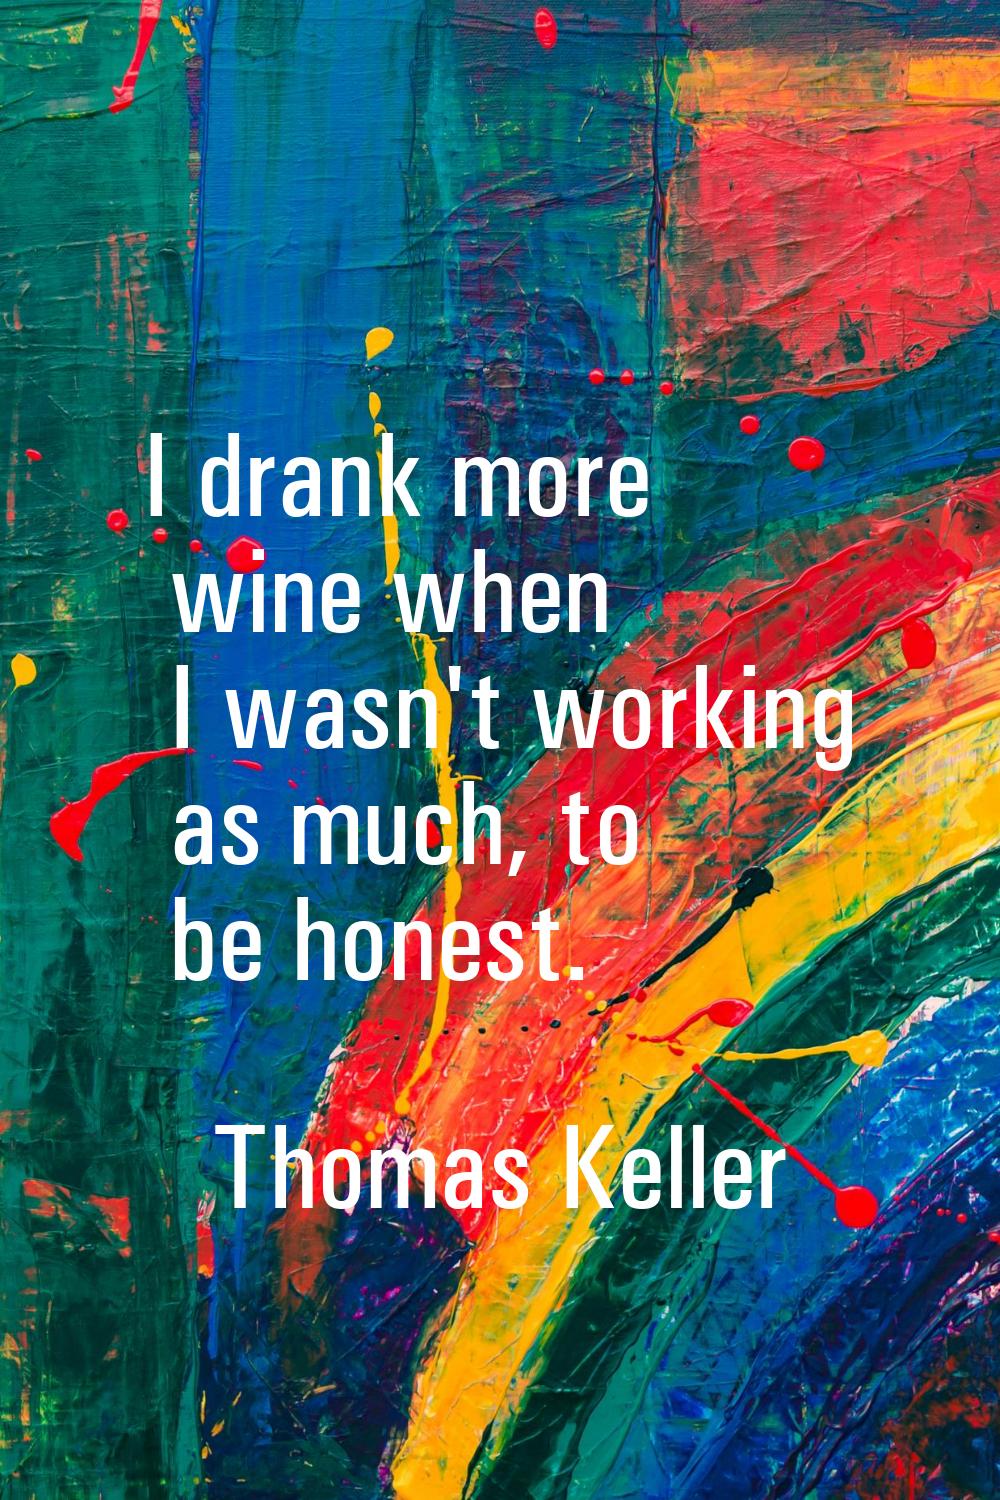 I drank more wine when I wasn't working as much, to be honest.